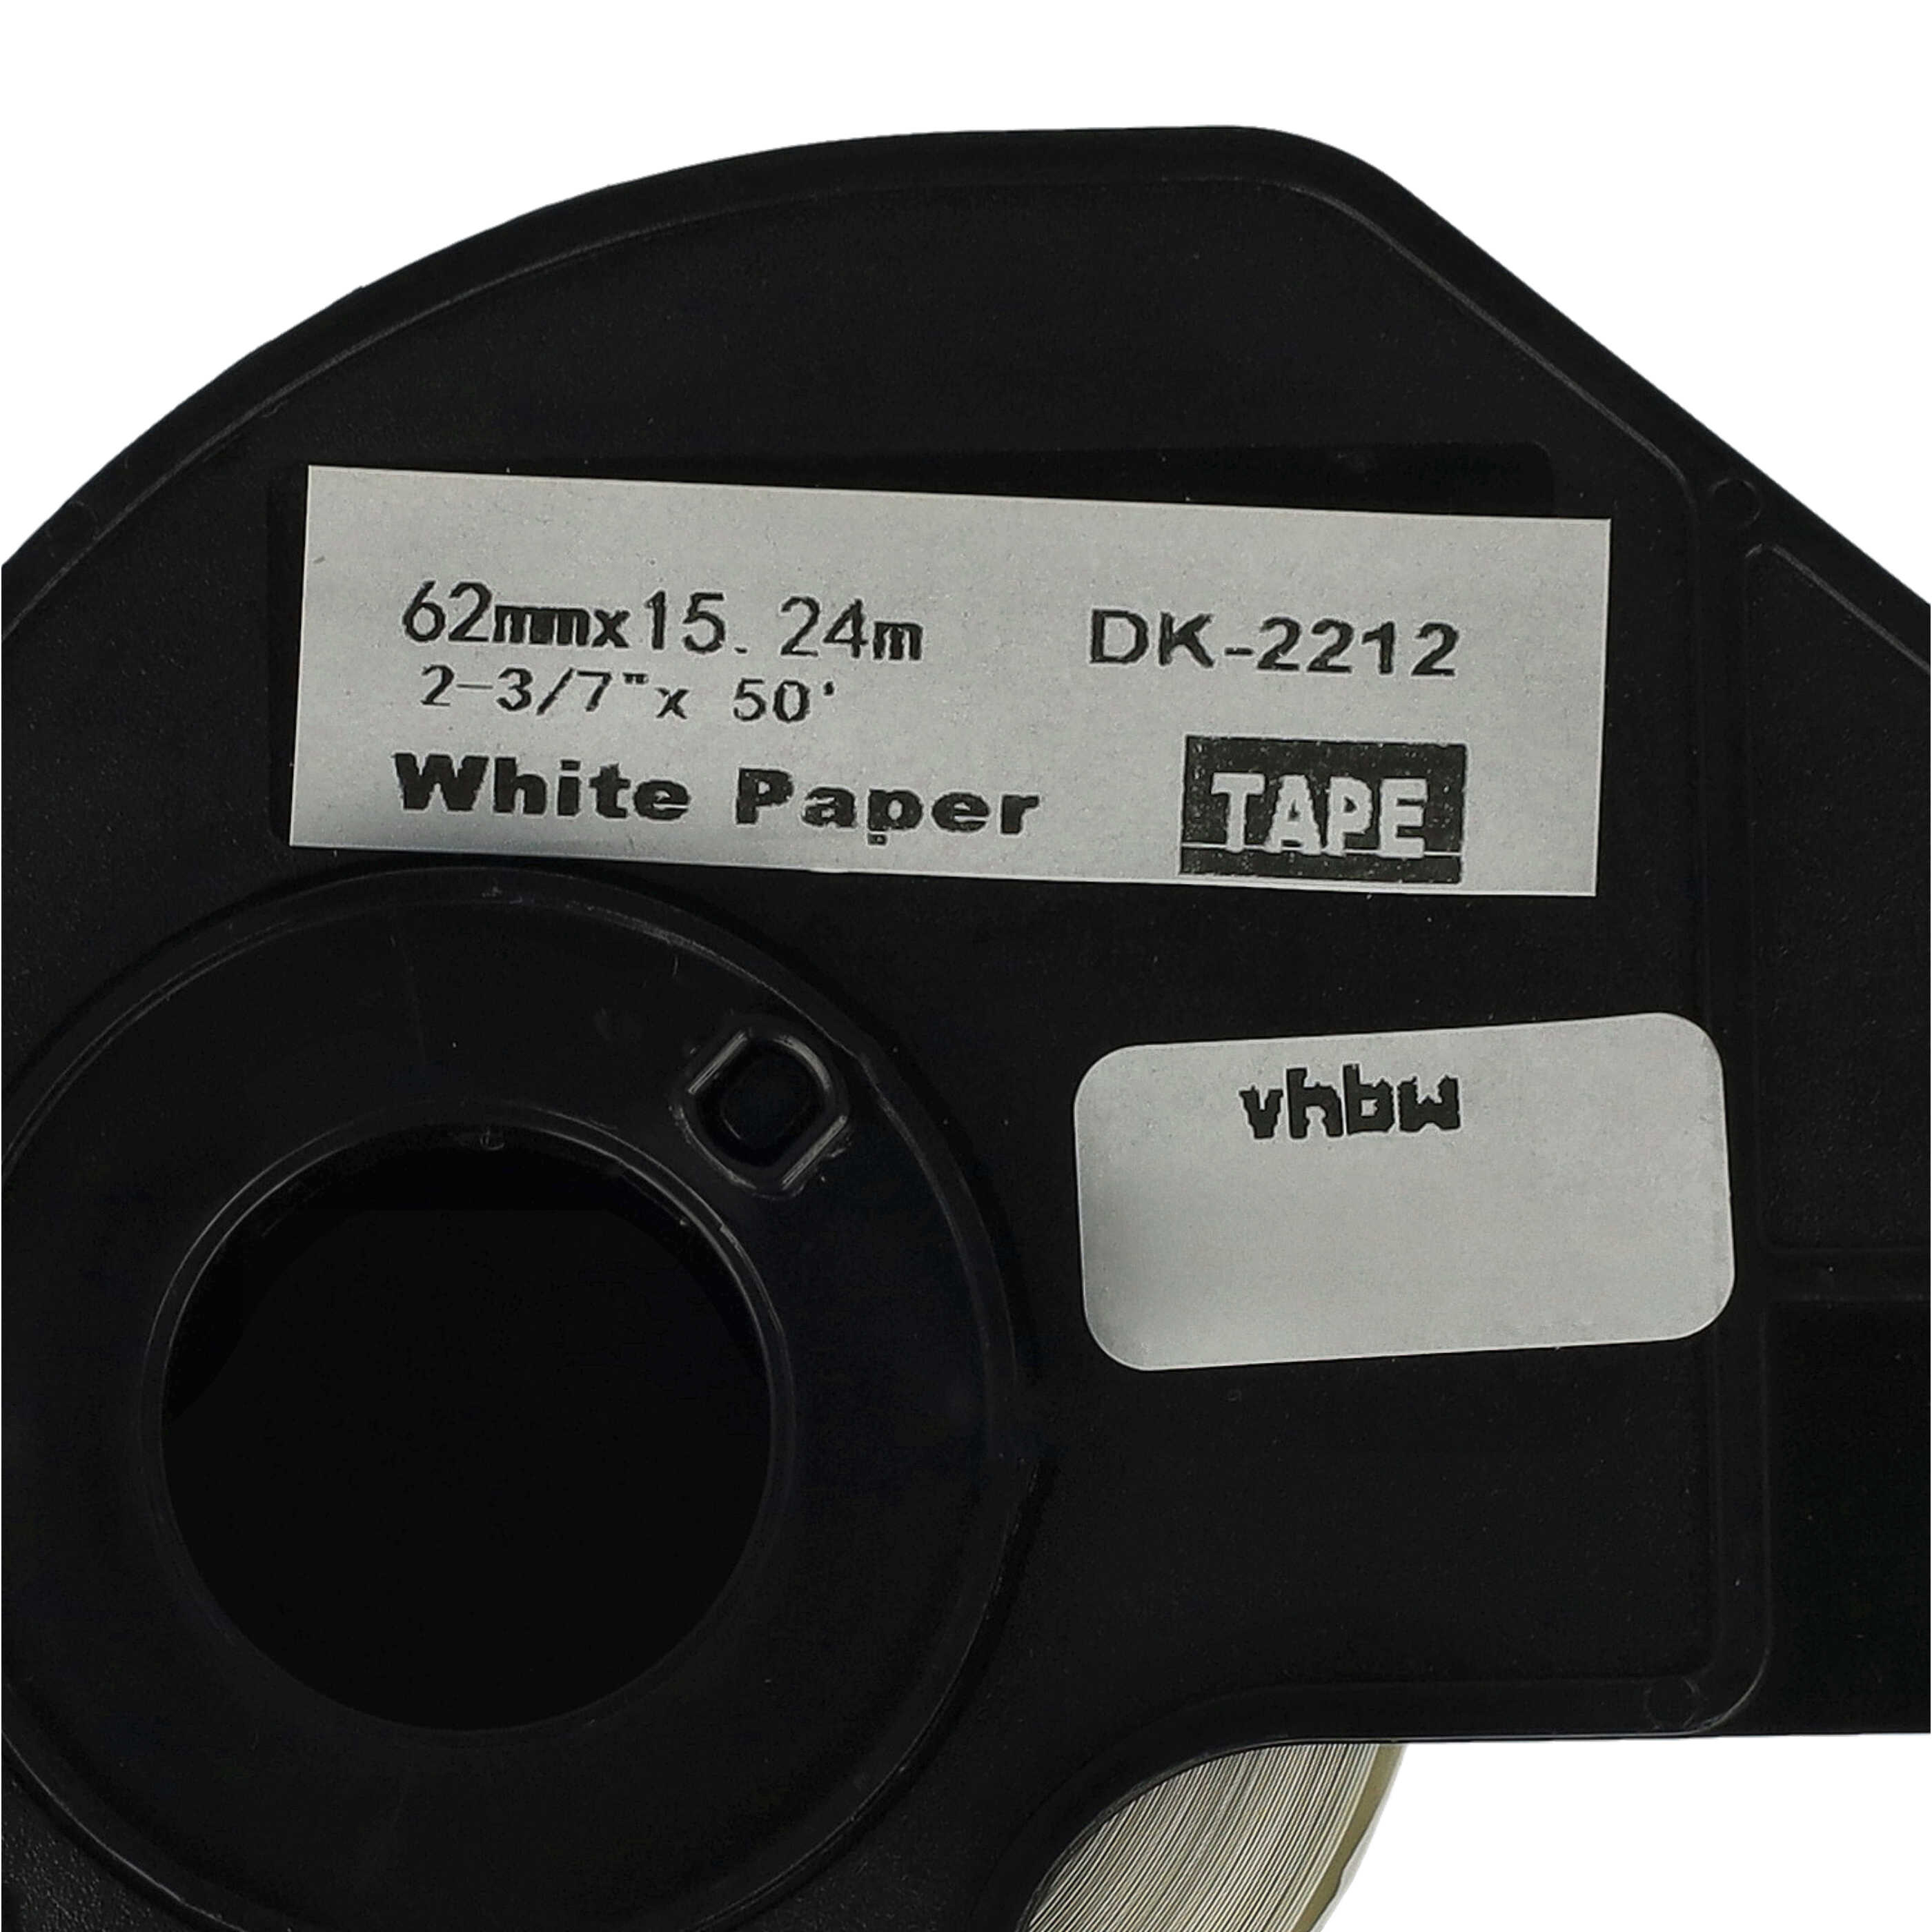 10x Labels replaces Brother DK-22212 for Labeller - 62 mm x 15.24m + Holder